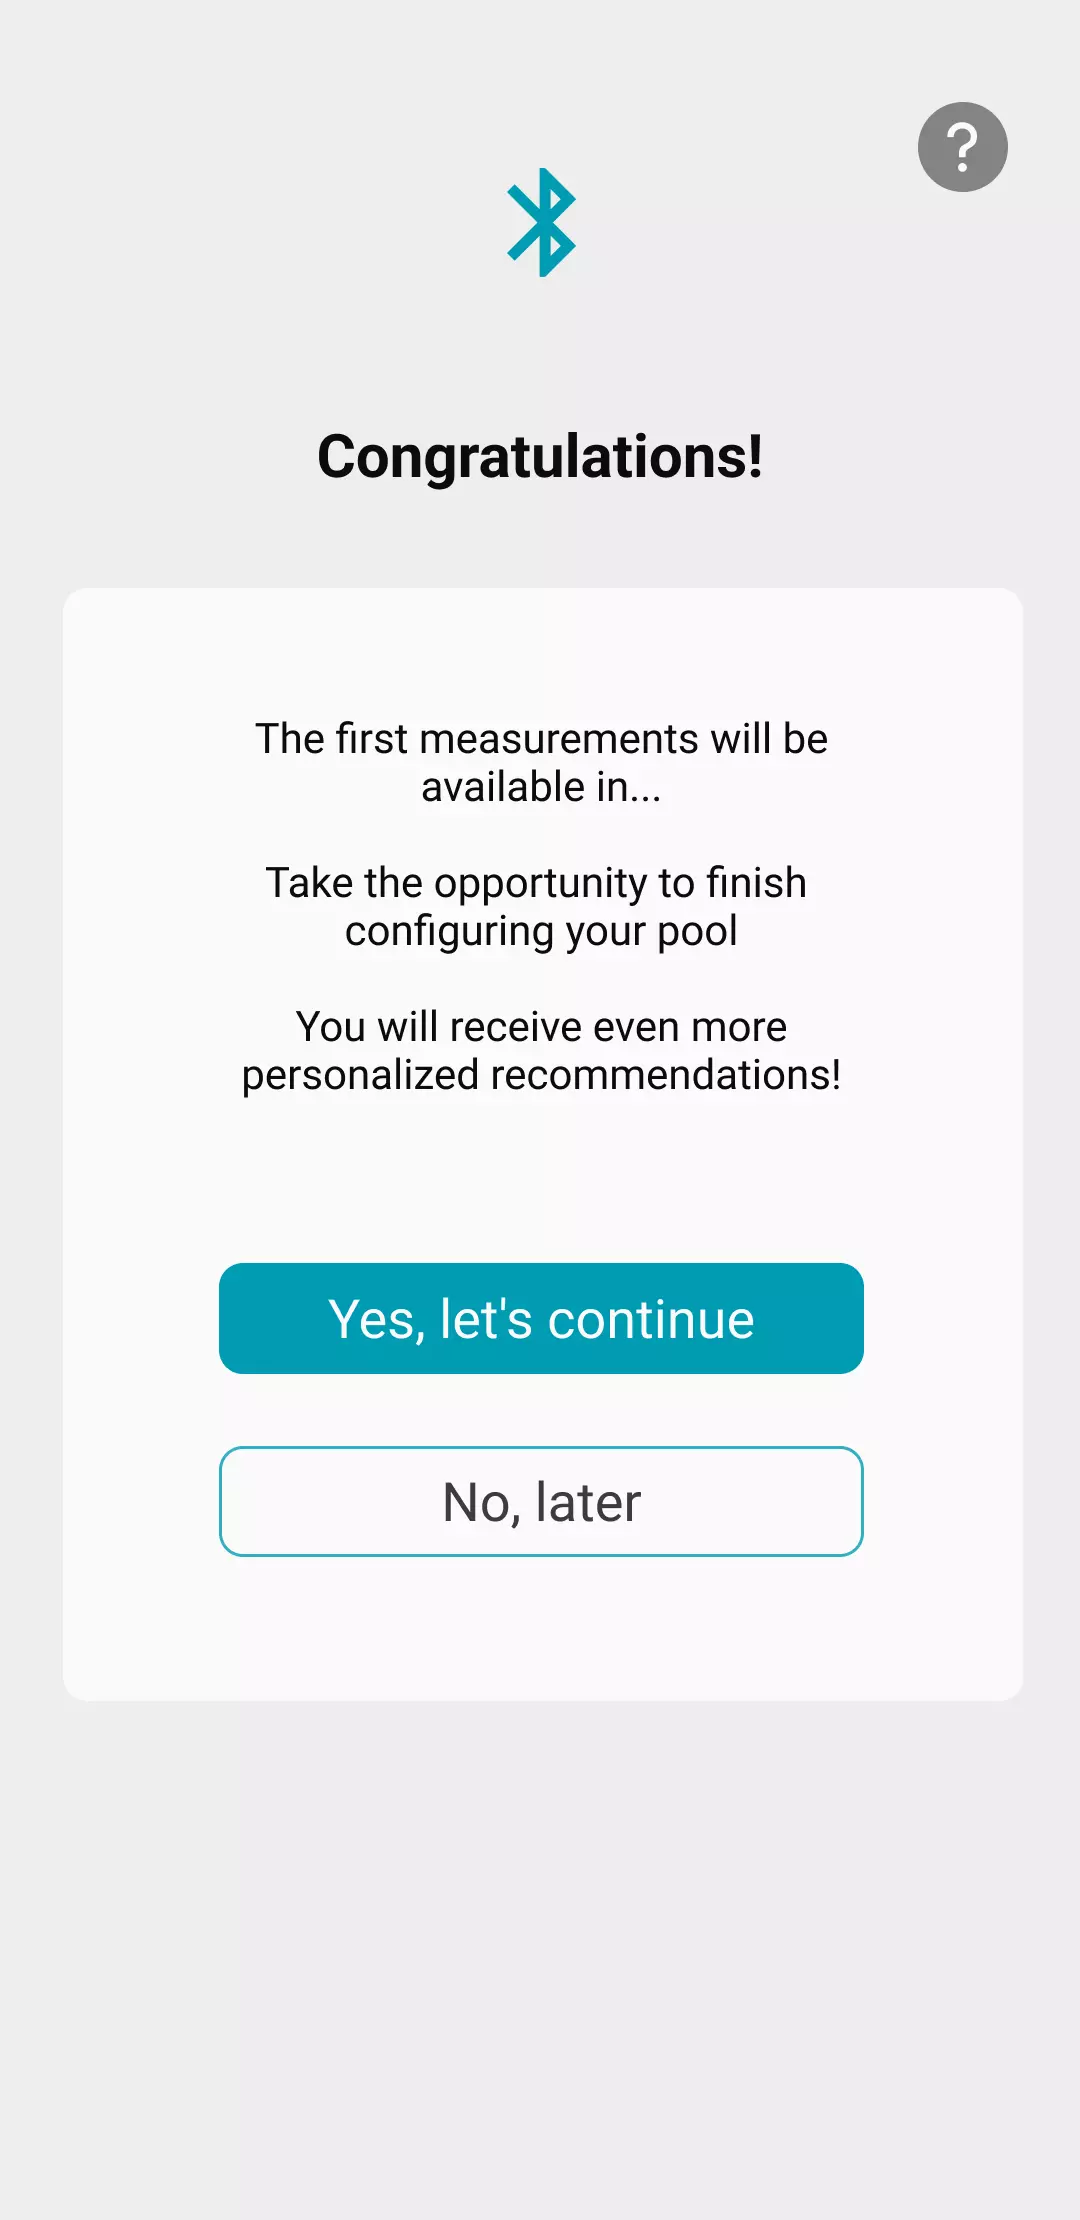 View of the application showing that ICO is now active, and that you can complete the configuration of your pool to obtain even more personalised recommendations